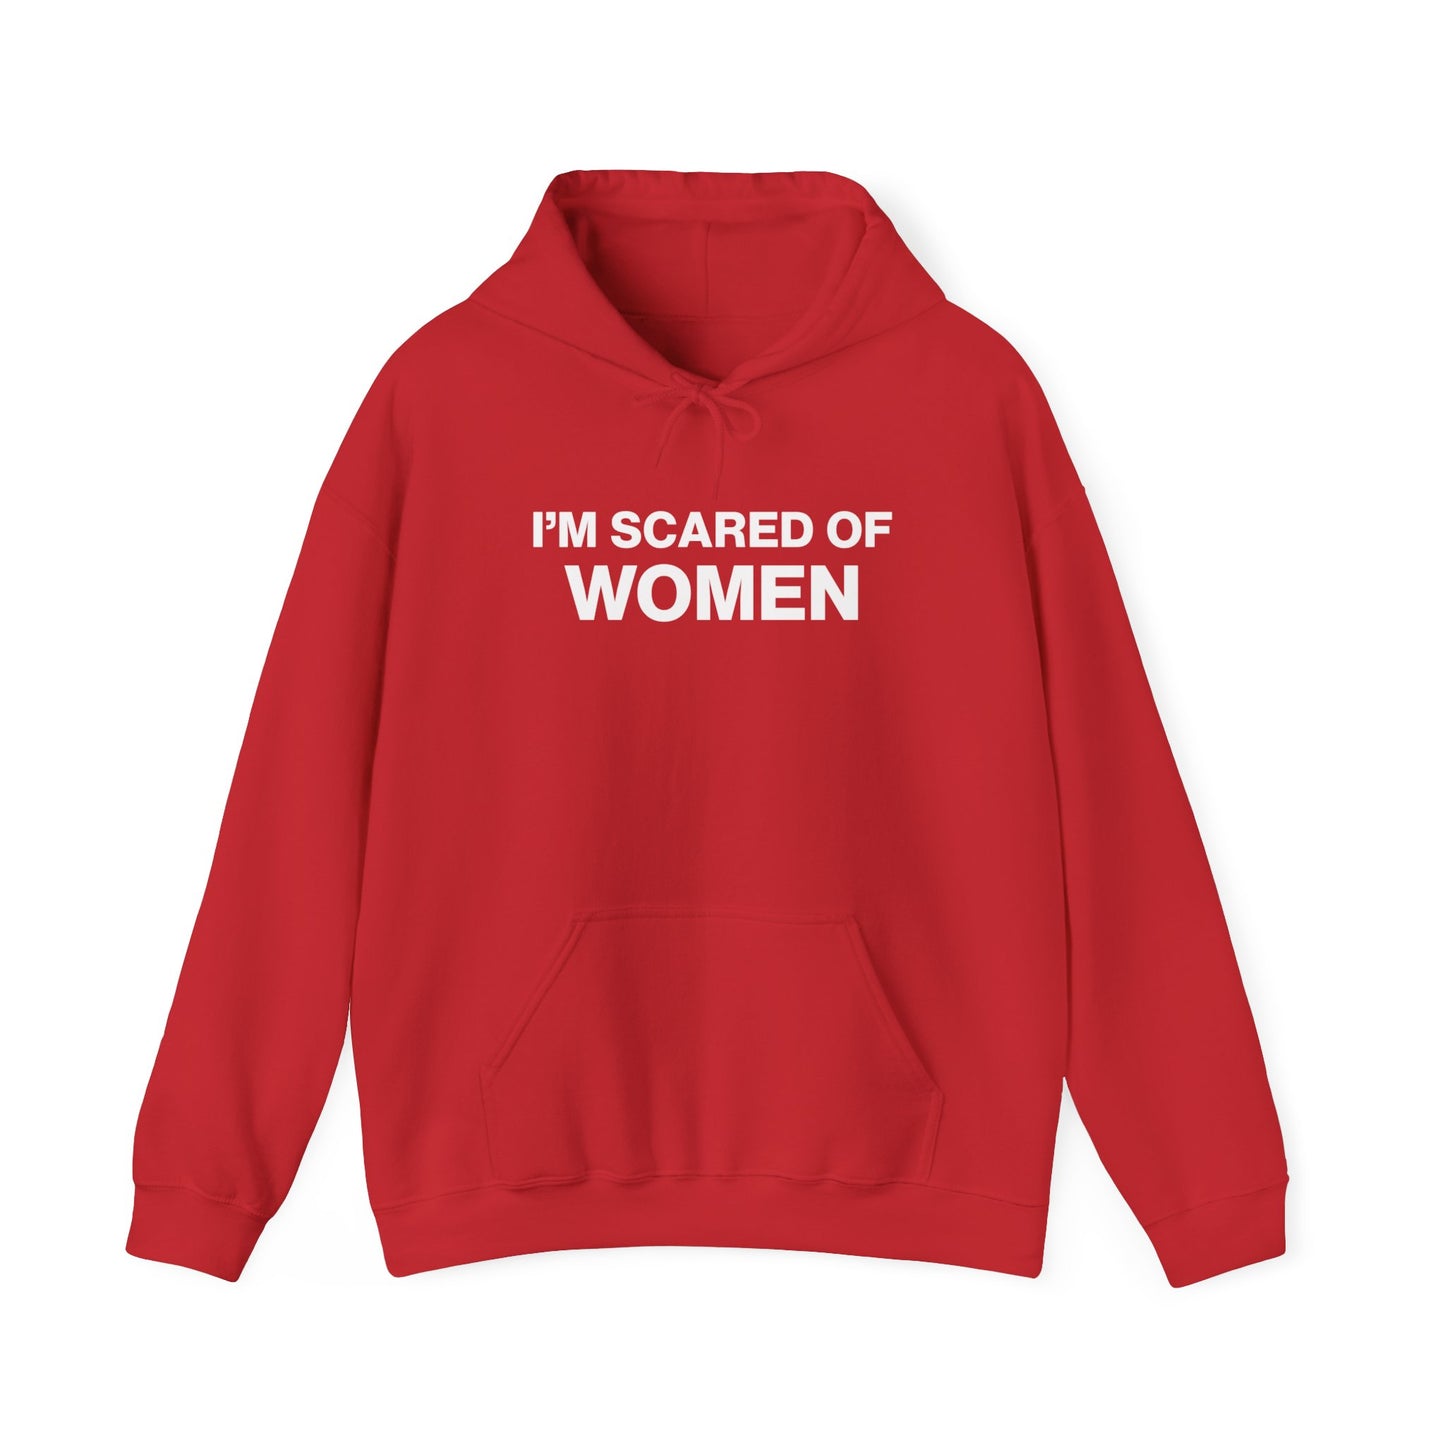 I'm Scared of Women Hoodie